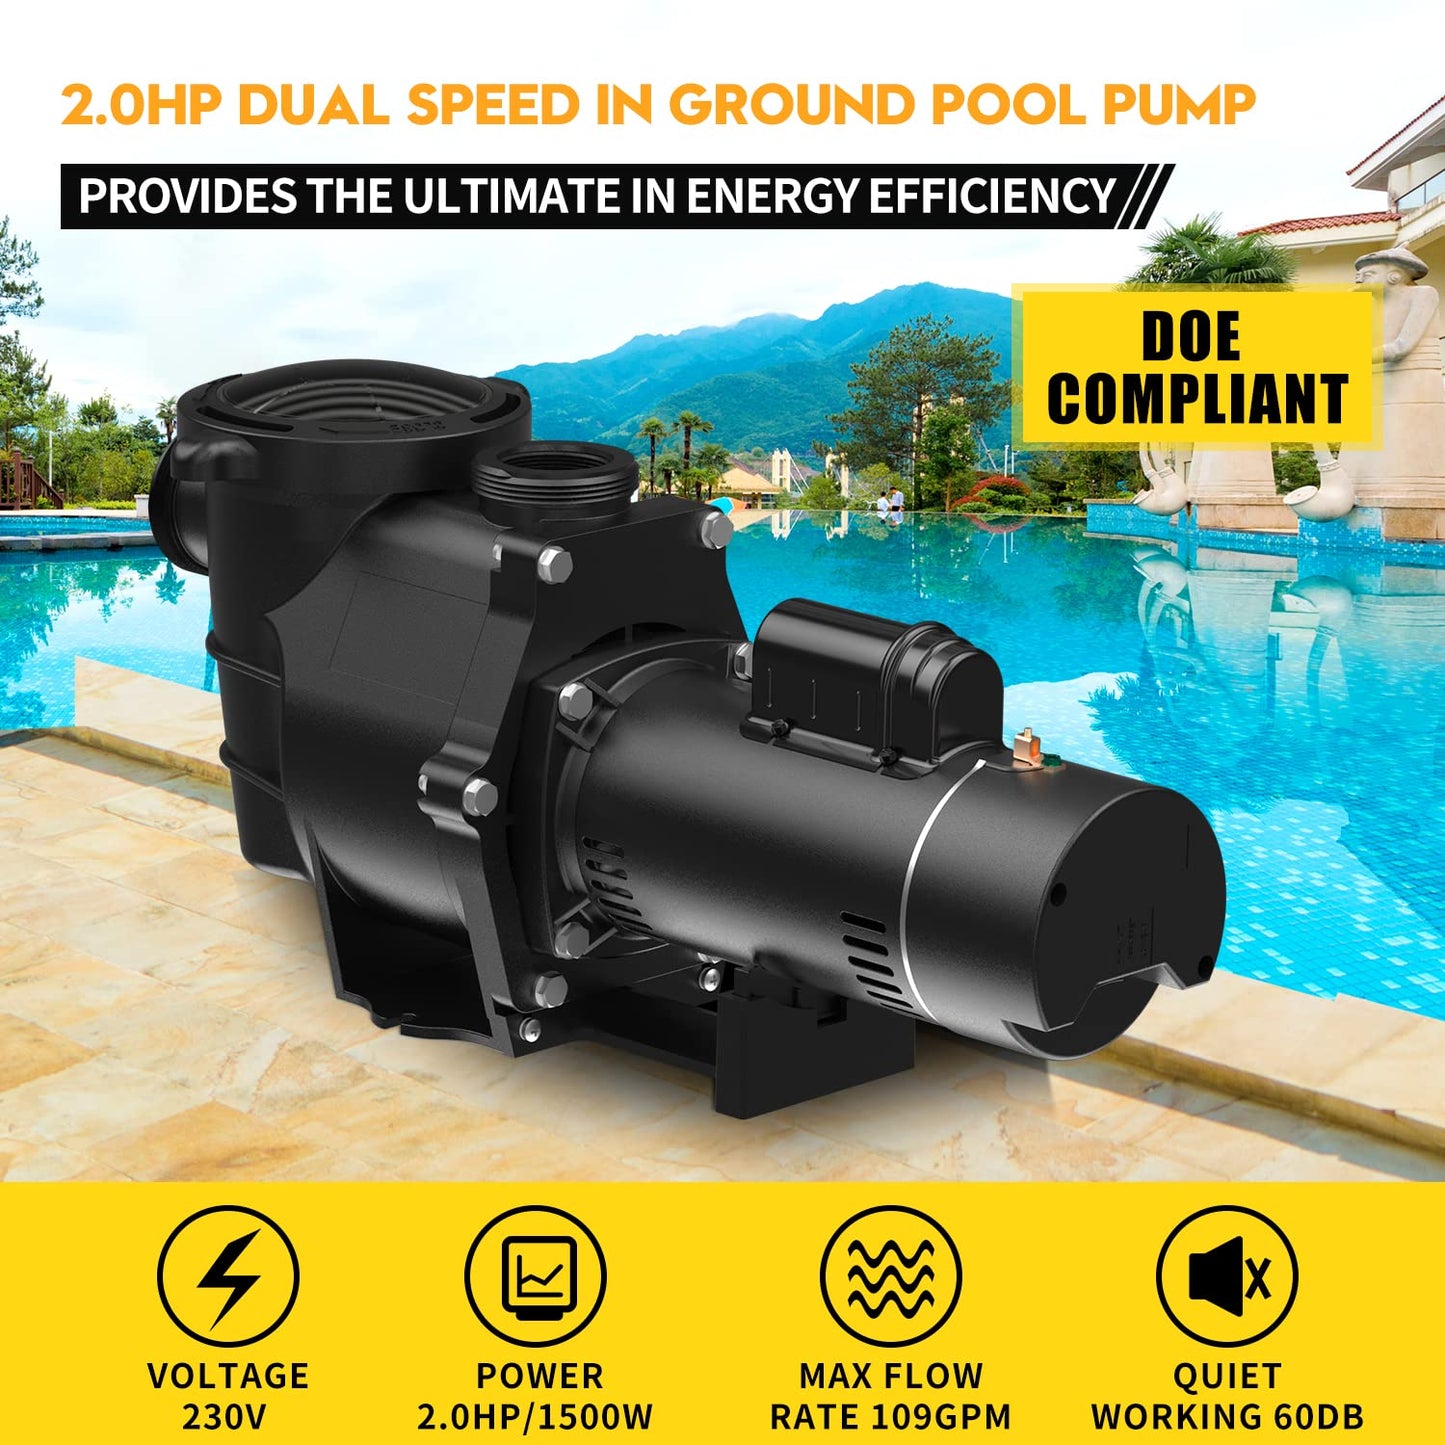 BRIOPAWS 2HP Dual Speed Pool Pump, 6420GPH Flow, 66FT Head Lift, 1.5" and 2" Fittings, Self-Priming Water Pump for Inground/Above Ground/Seawater Pools and Hot Tubs, 230V 60HZ AC 2.0hp